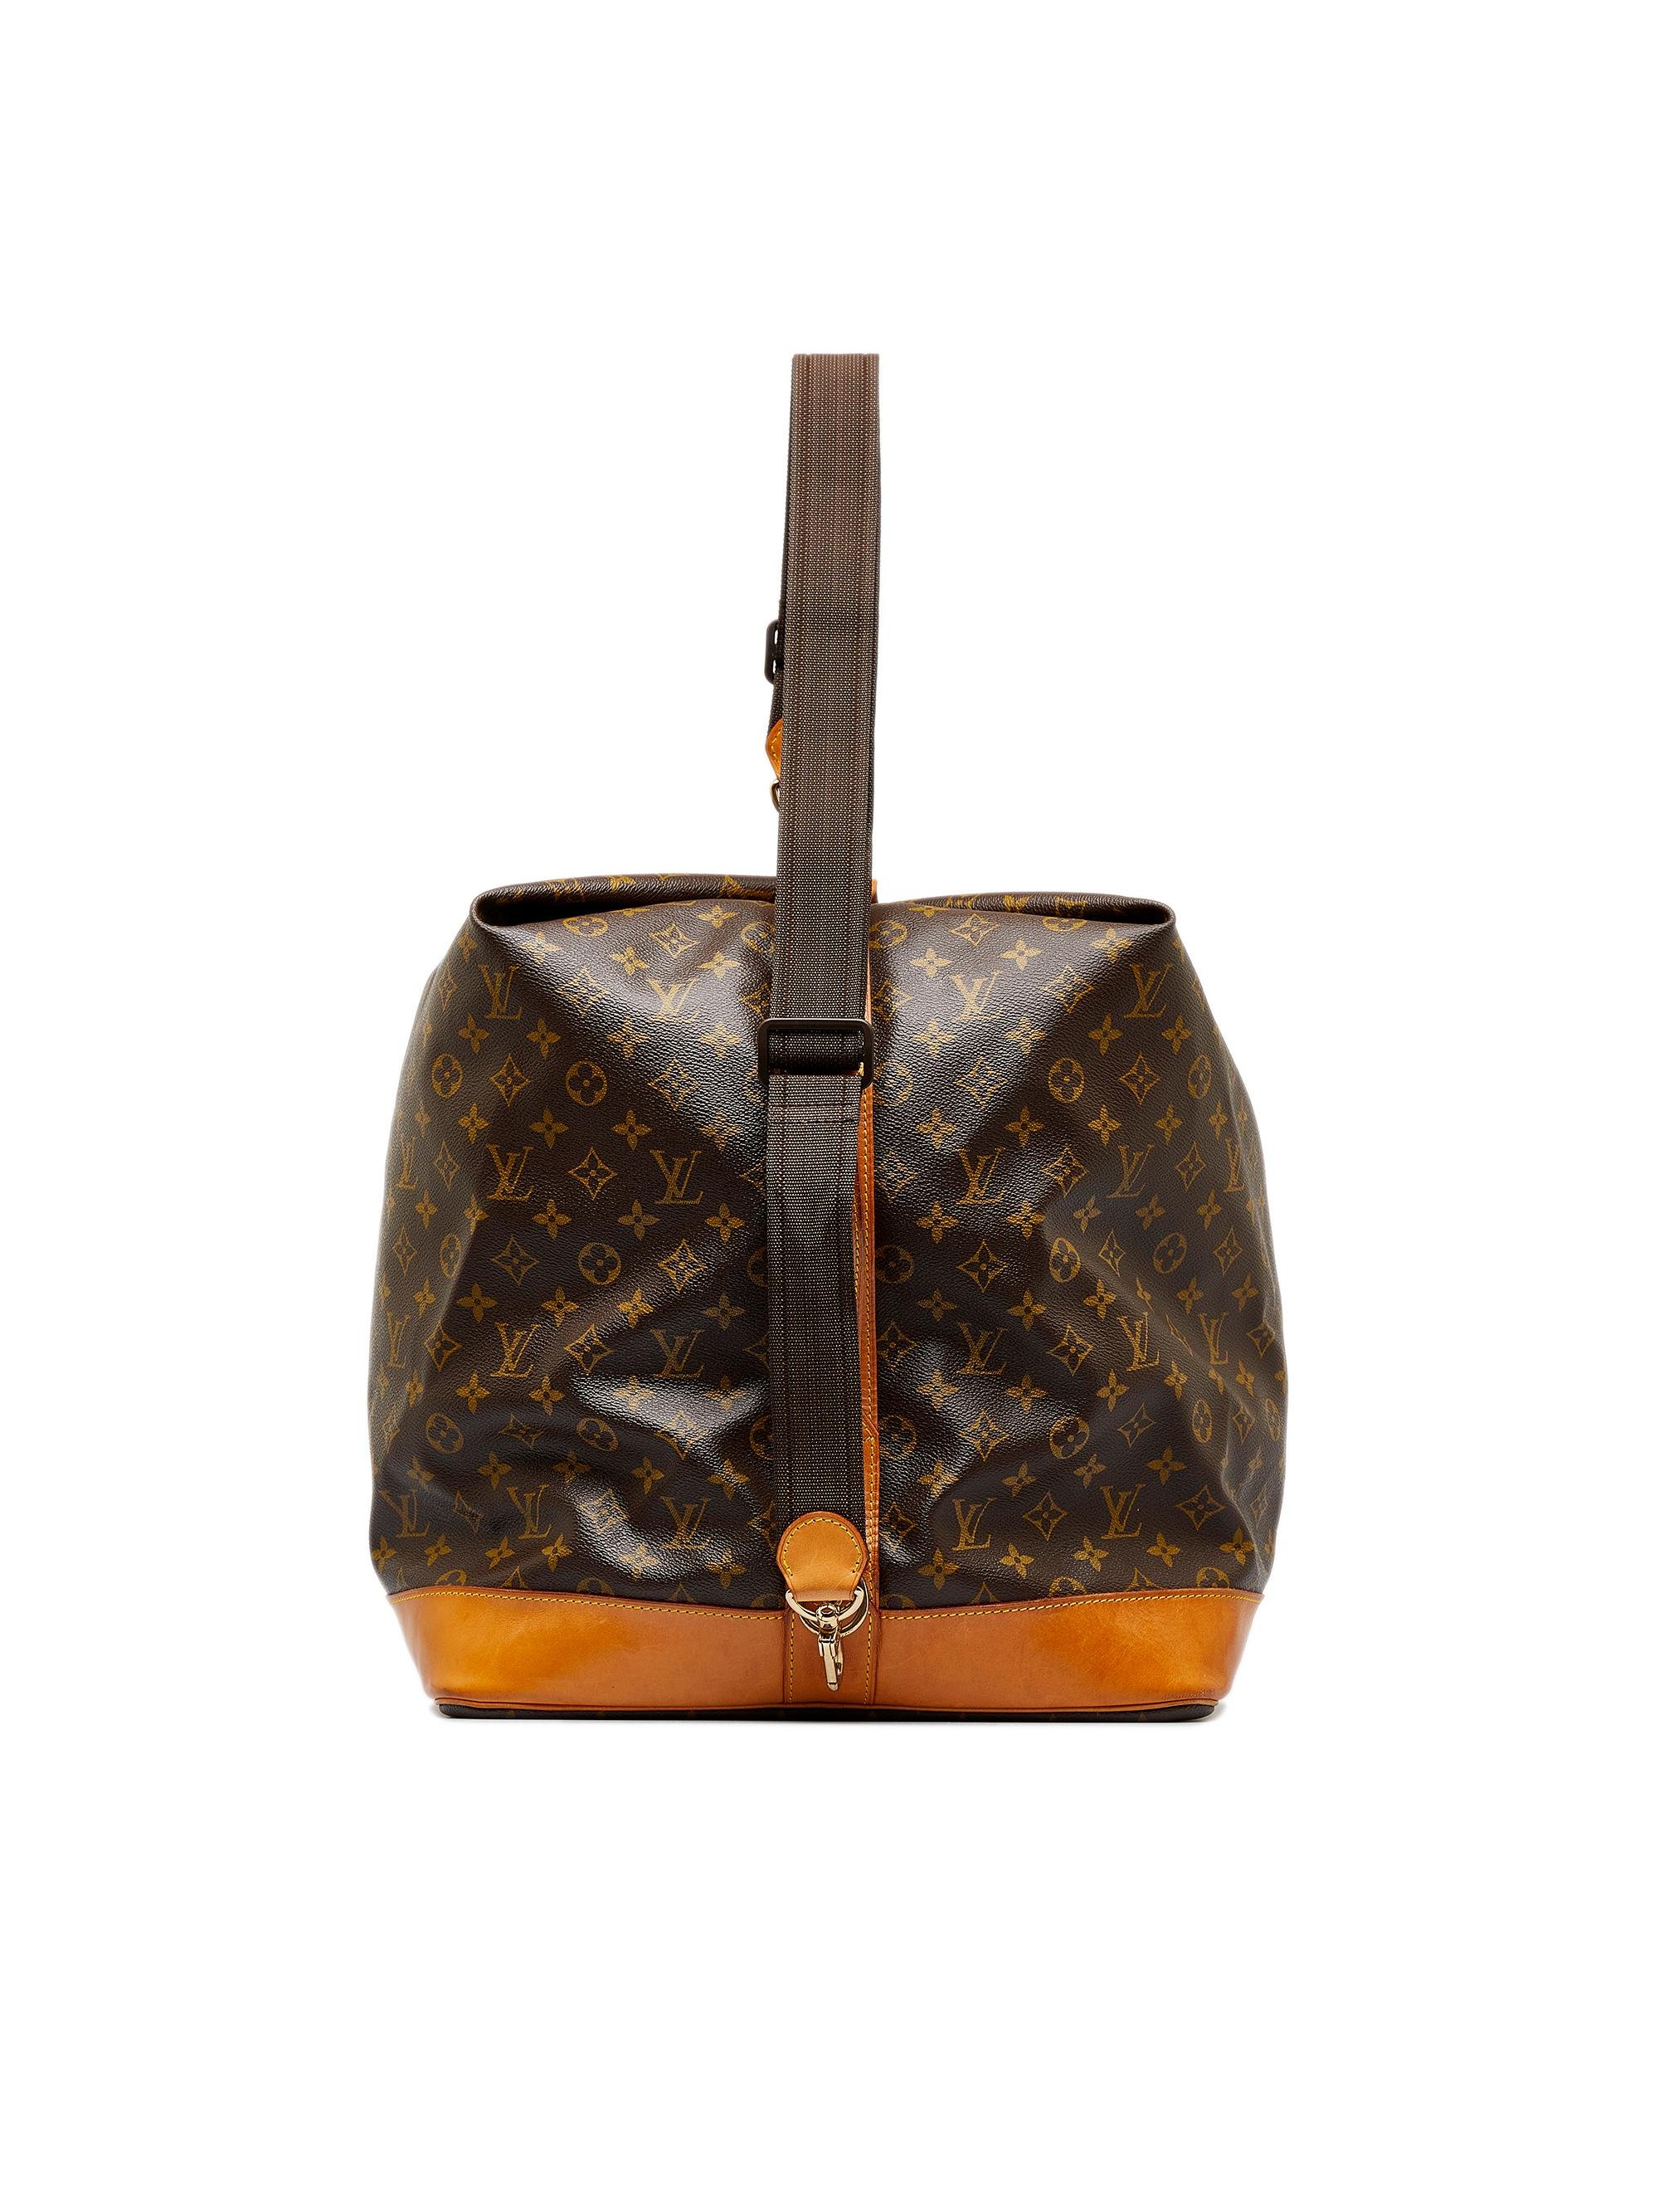 Louis Vuitton Marin - Travel Bag second hand prices